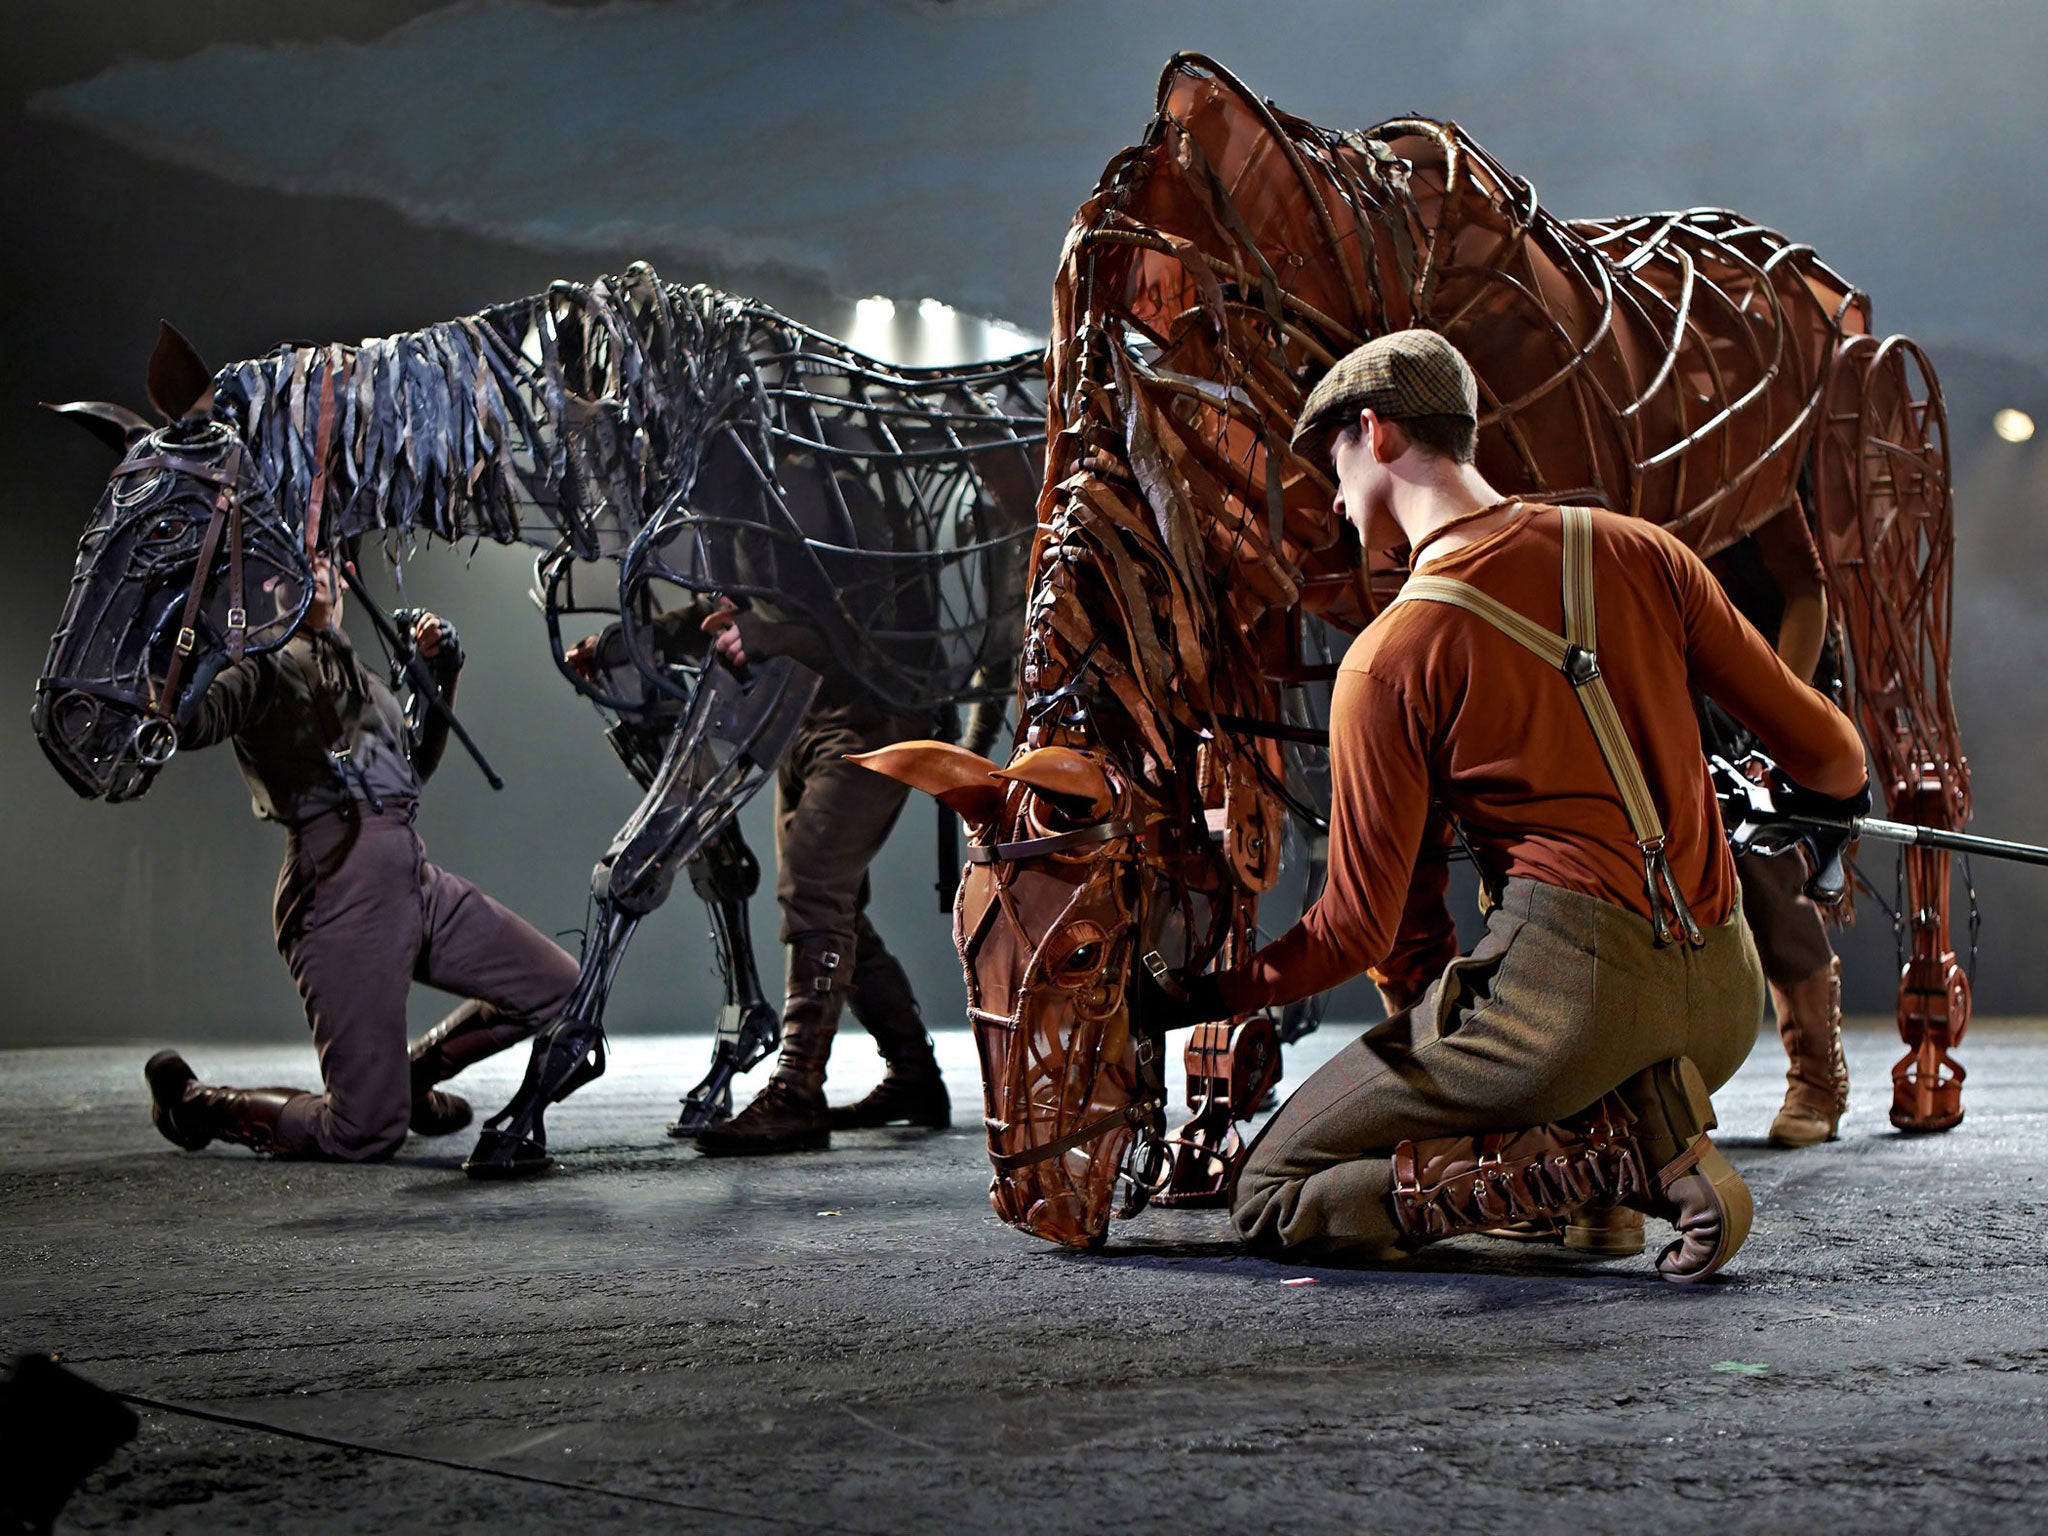 One family of four can see War Horse for free this summer